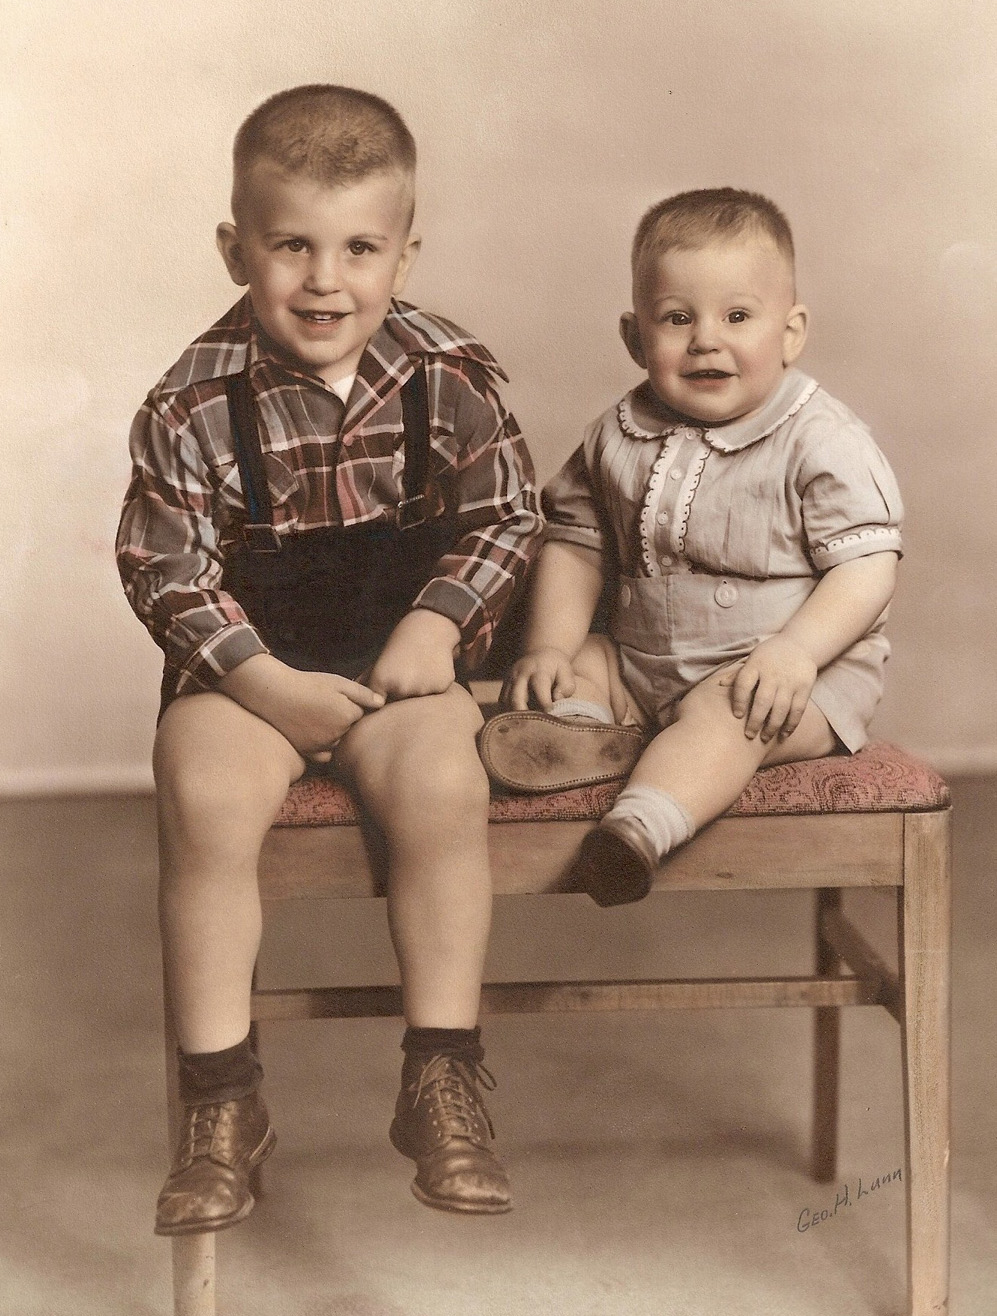 My brother Don (left) and me, taken in 1949. I was soon to lose all that baby fat. View full size.